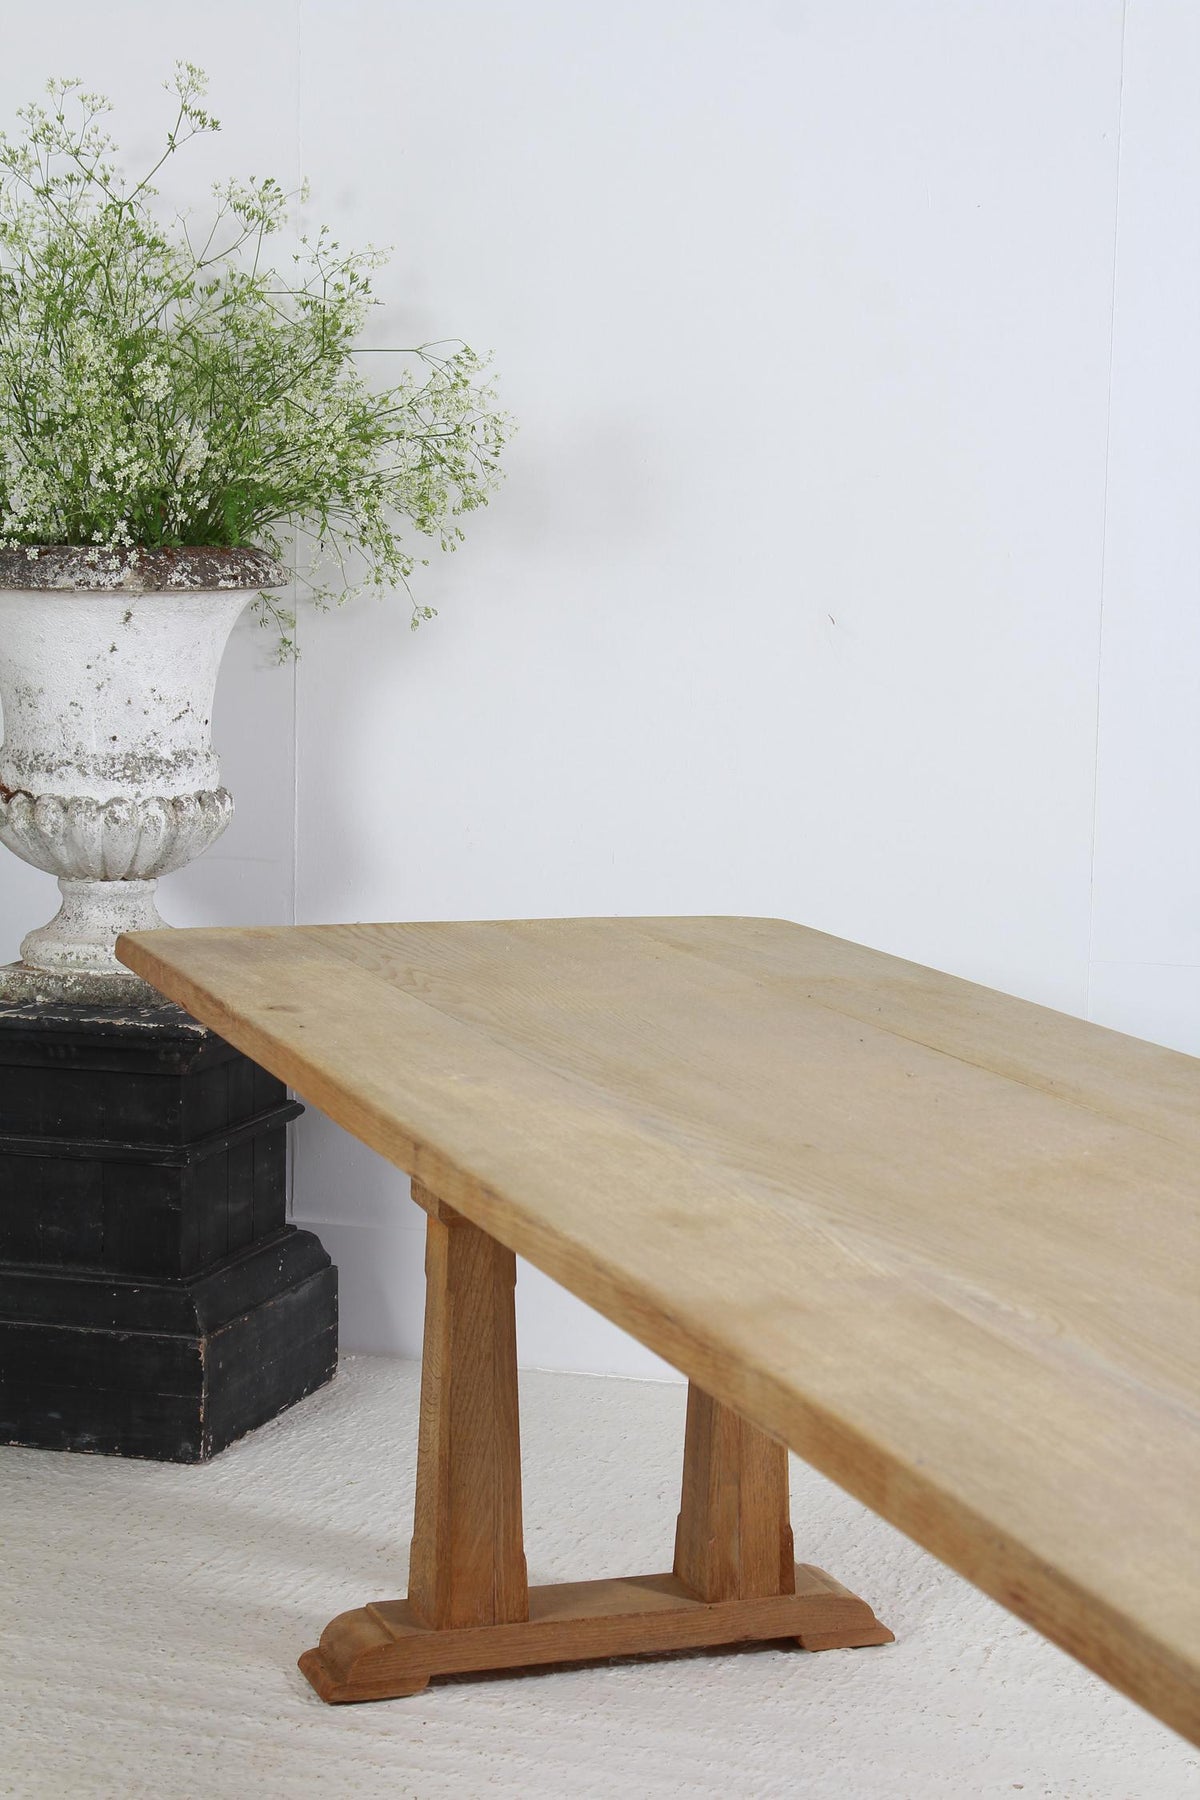 Enormous French Bleached Oak Community Dining Table